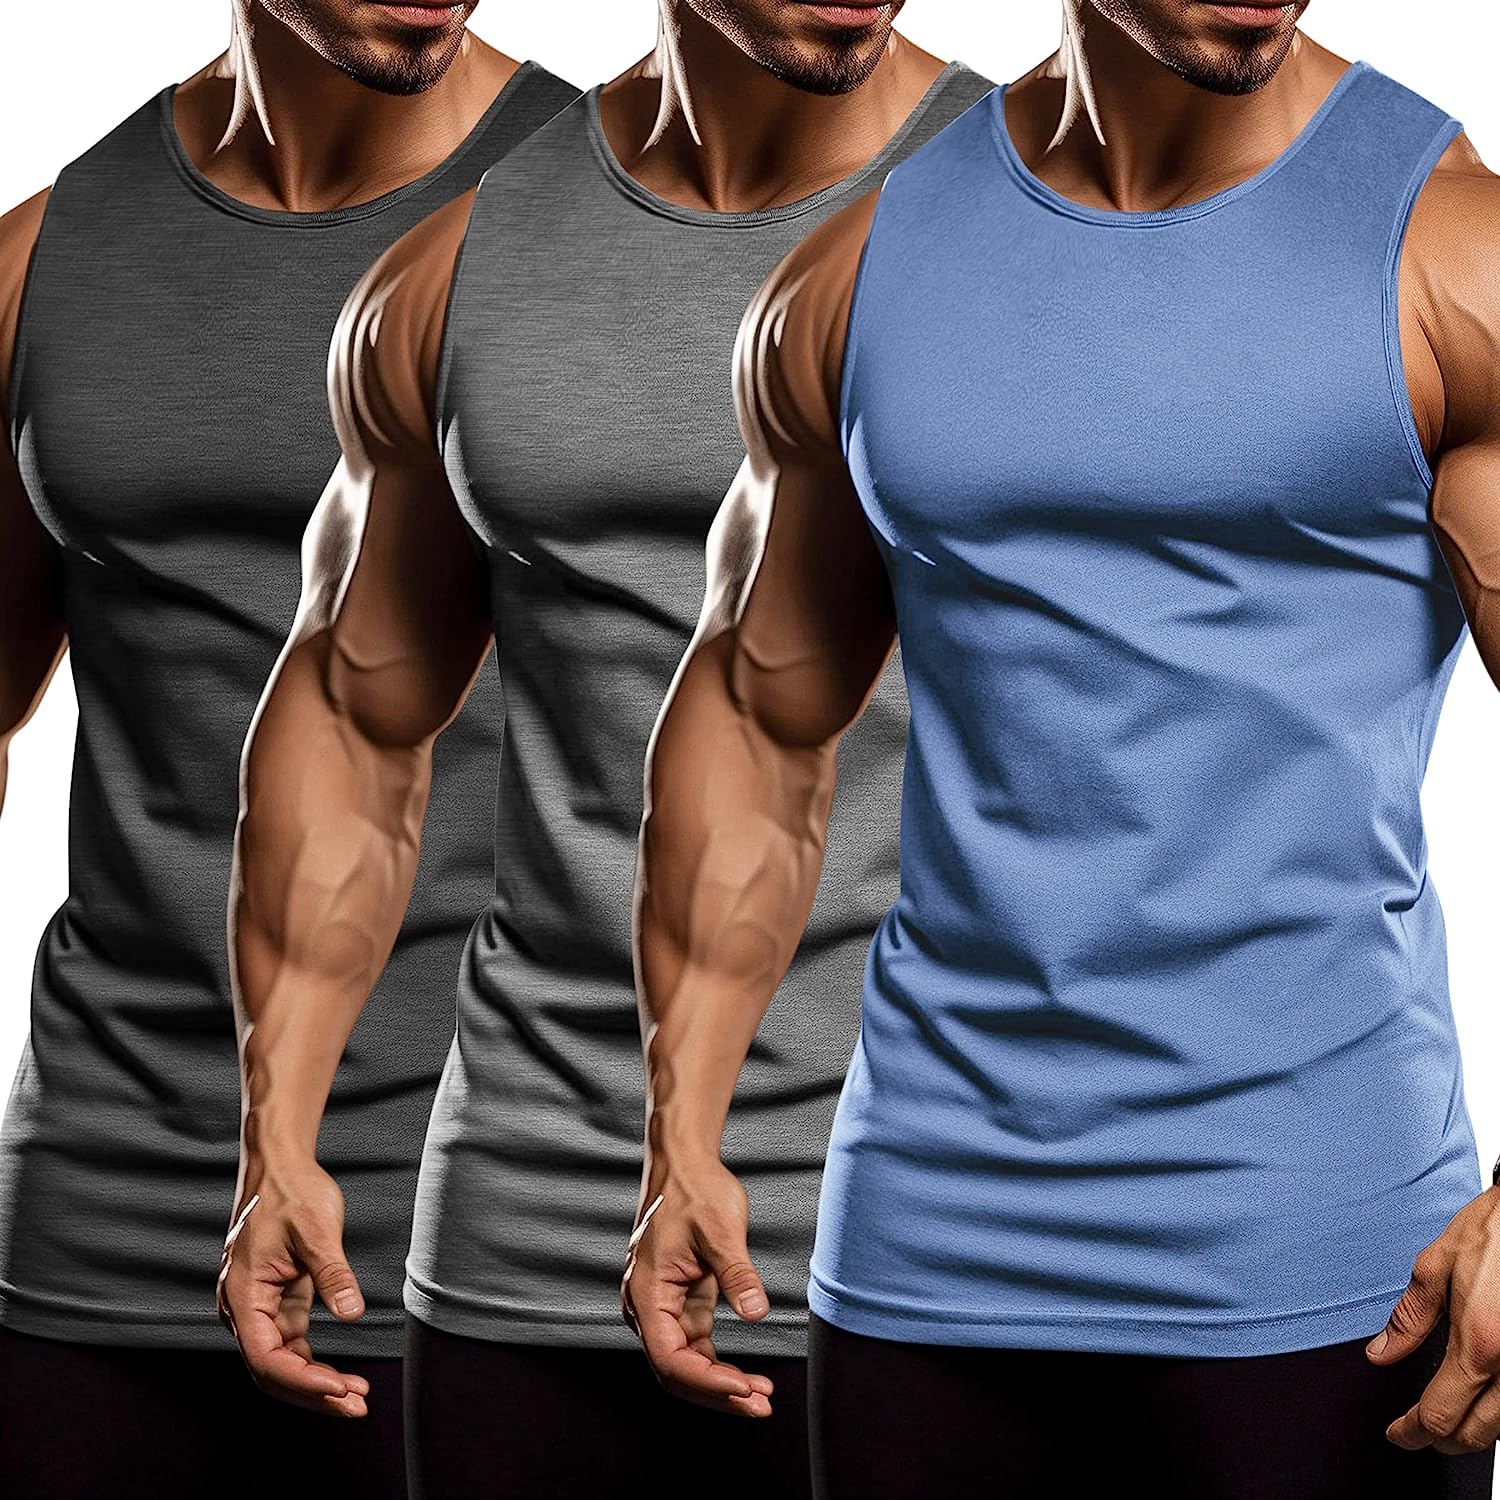 COOFANDY Men's 3 Pack Workout Tank Tops Gym Muscle Tee Bodybuilding Fitness  Sleeveless T Shirts